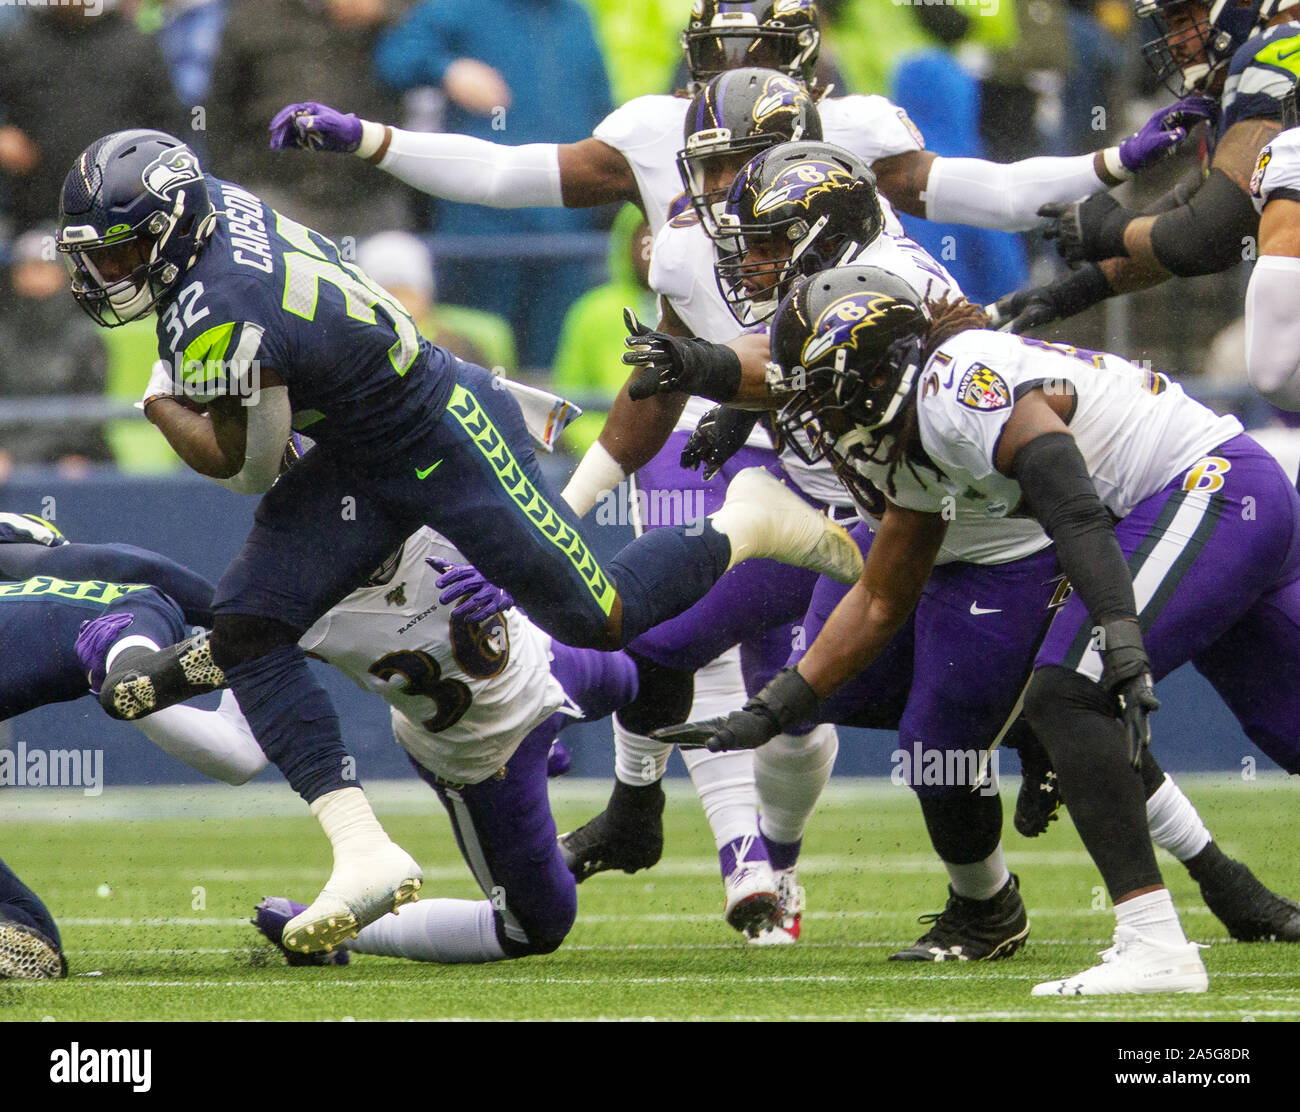 Seattle, United States. 20th Oct, 2019. Seattle Seahawks running back Chris Carson (32) breaks attempted tackles by the Baltimore Ravens at CenturyLink Field on Sunday, October 20, 2019 in Seattle, Washington. The Ravens beat the Seahawks 30-16. Photo by Jim Bryant/UPI Credit: UPI/Alamy Live News Stock Photo